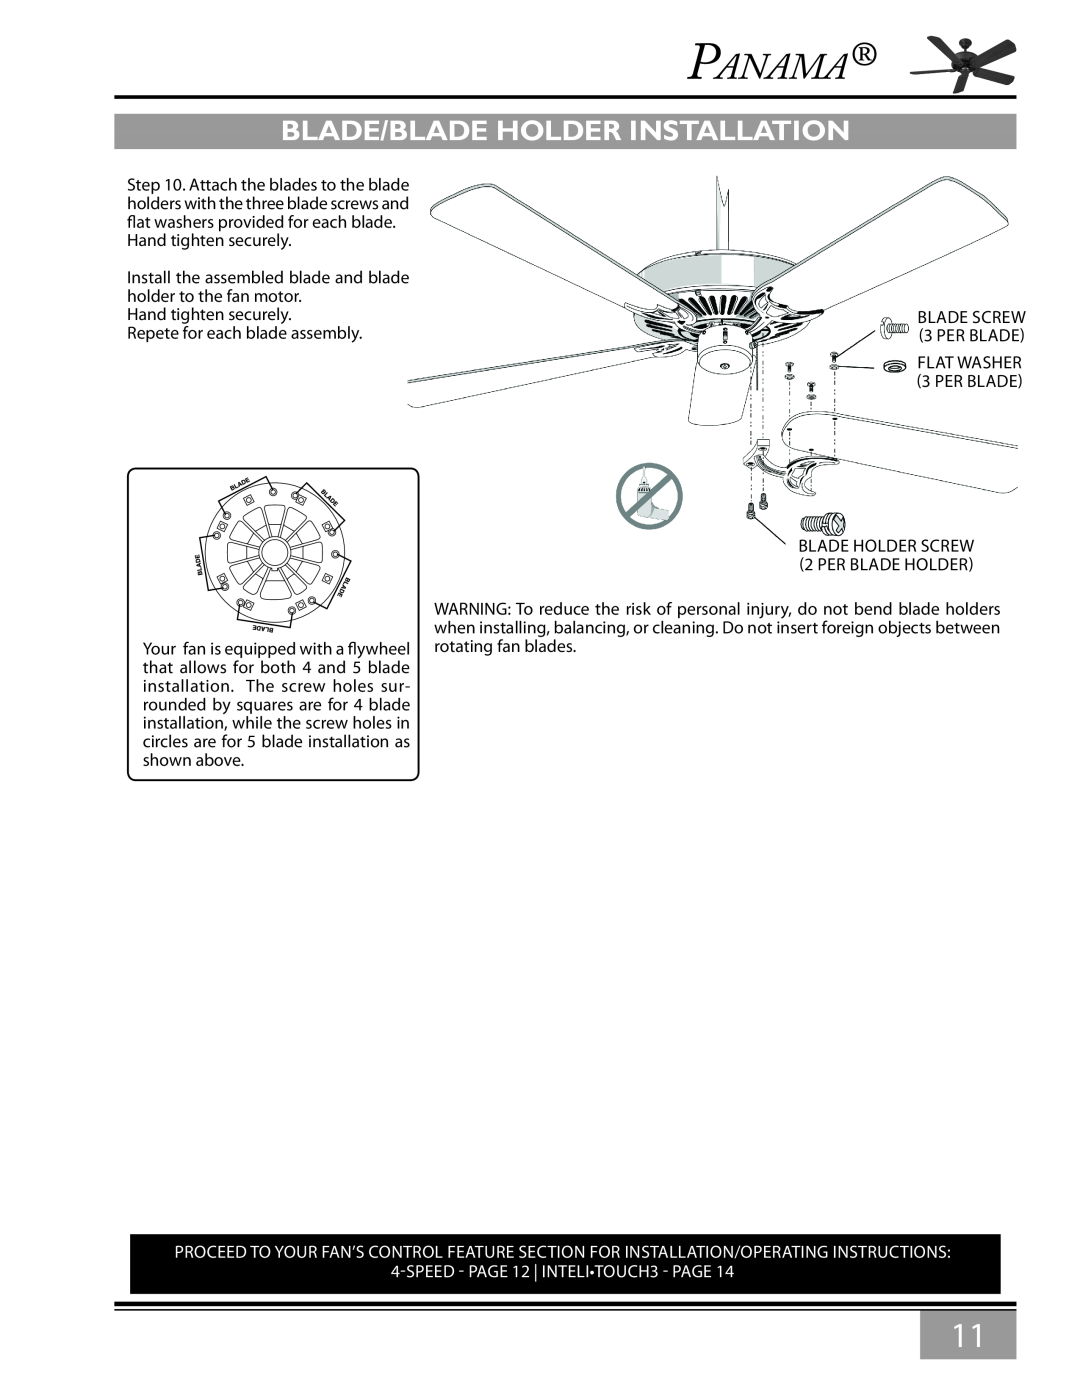 Casablanca Fan Company 6643Z owner manual blade/blade holder installation, SPEED - PAGE 12 INTELITOUCH3 - PAGE, Panama 